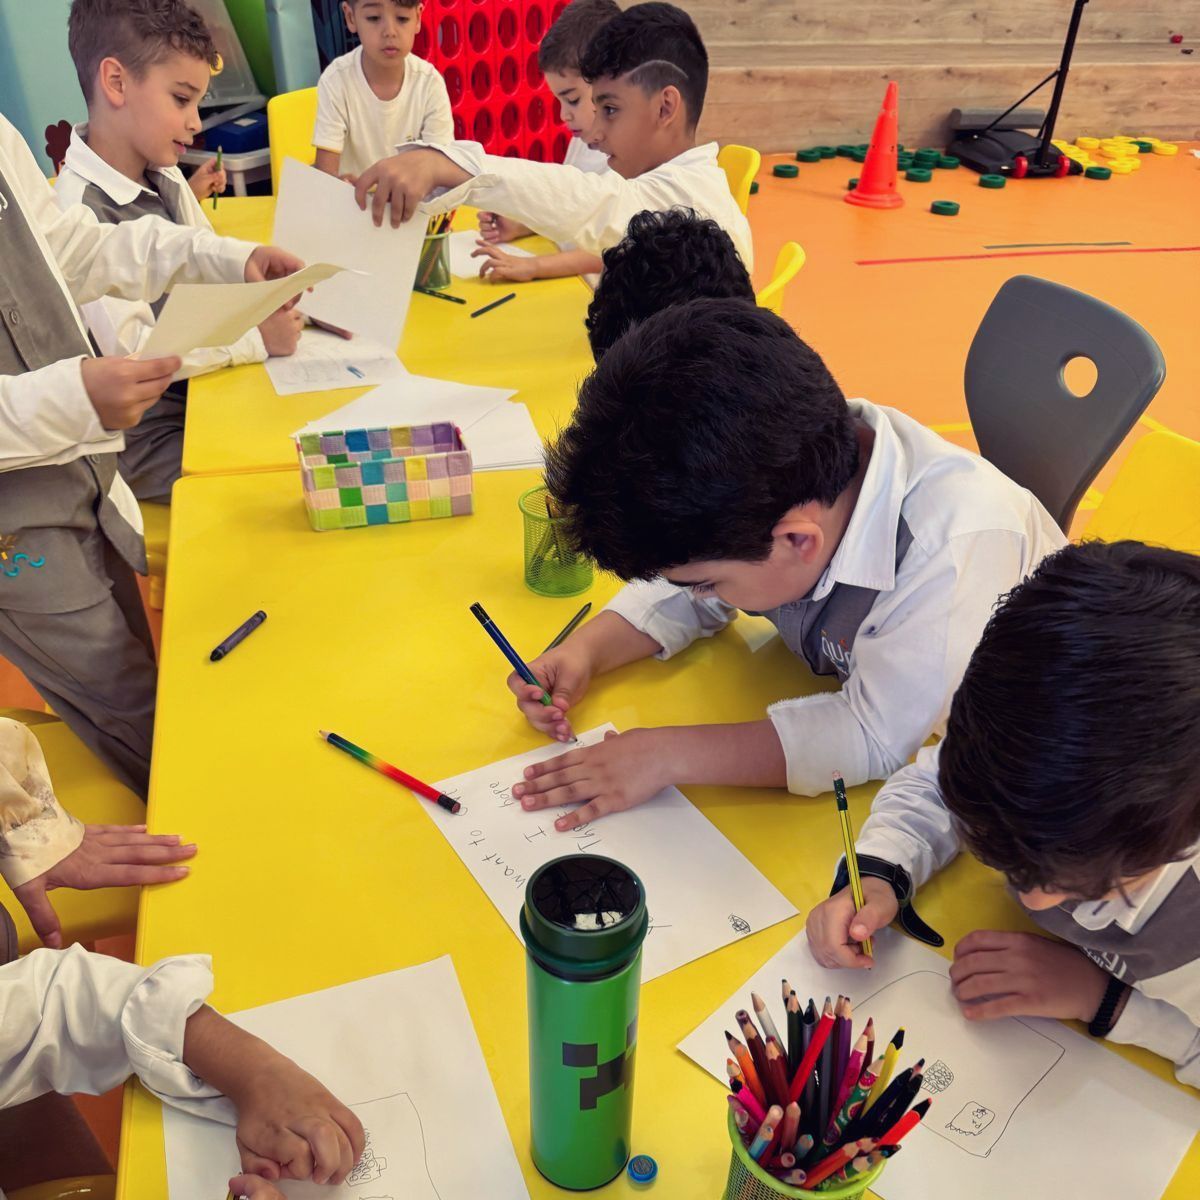 A group of young boys are sitting at a table drawing on papers